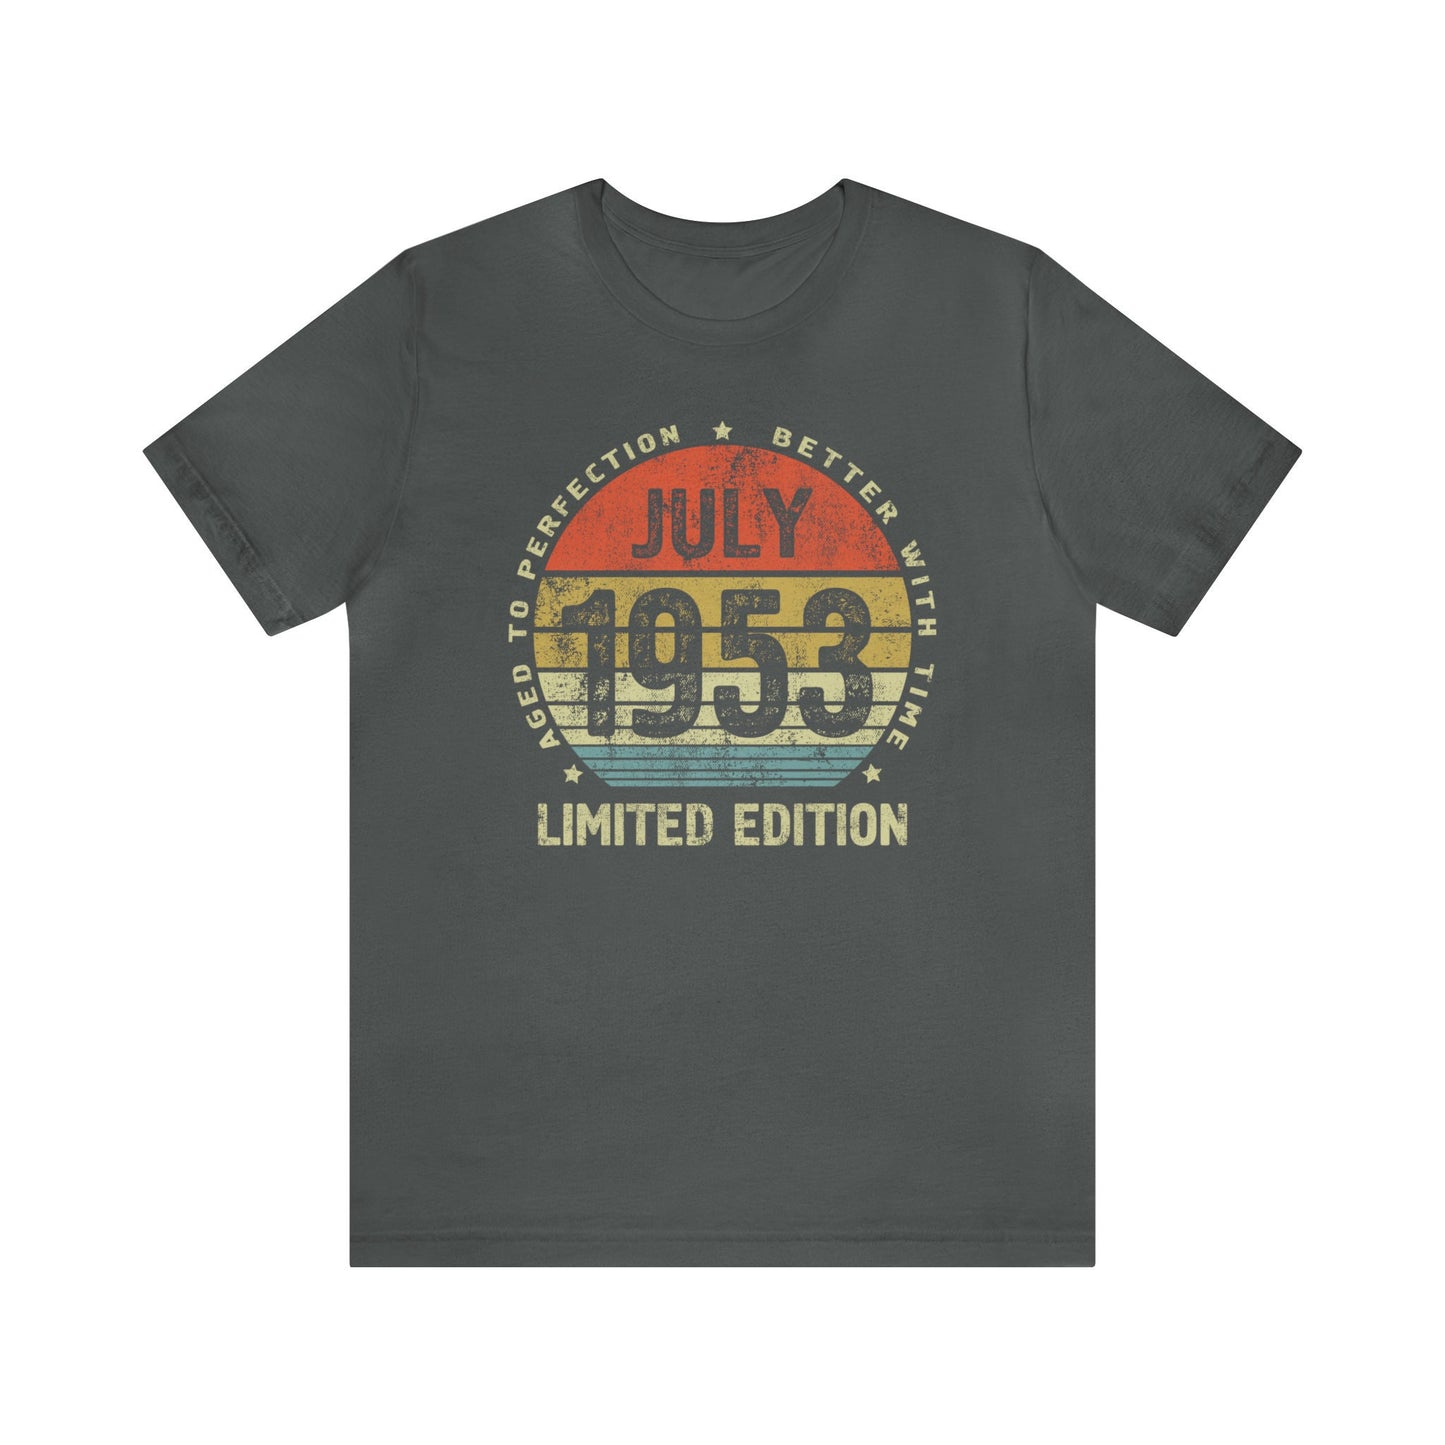 July 1953 birthday shirt for women or men, Gift  t-shirt for wife or husband